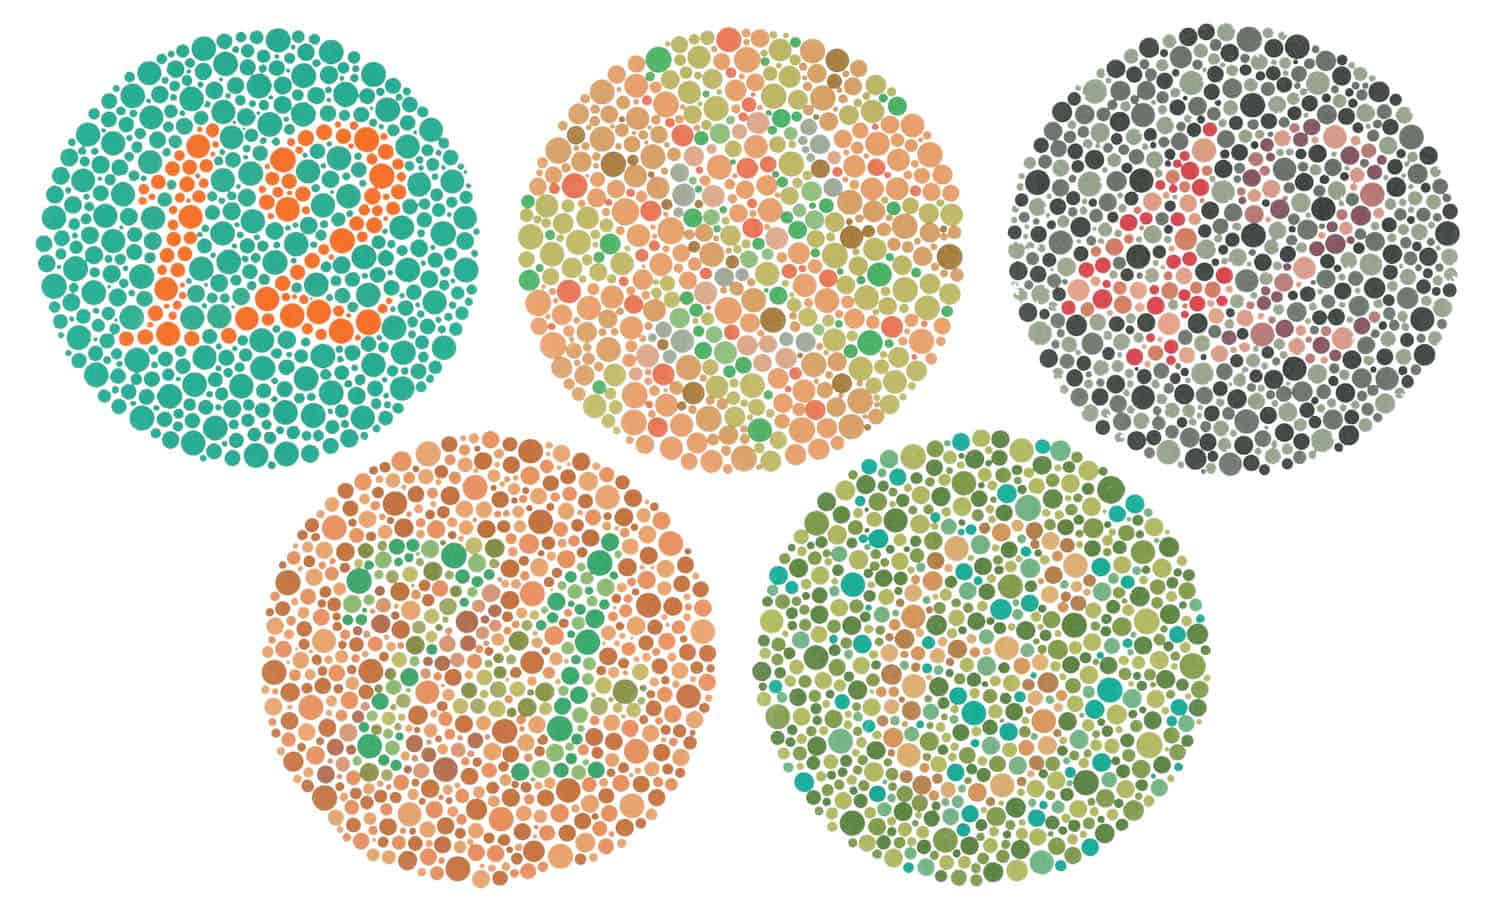 Web design accessible to color blind people – 5 tips